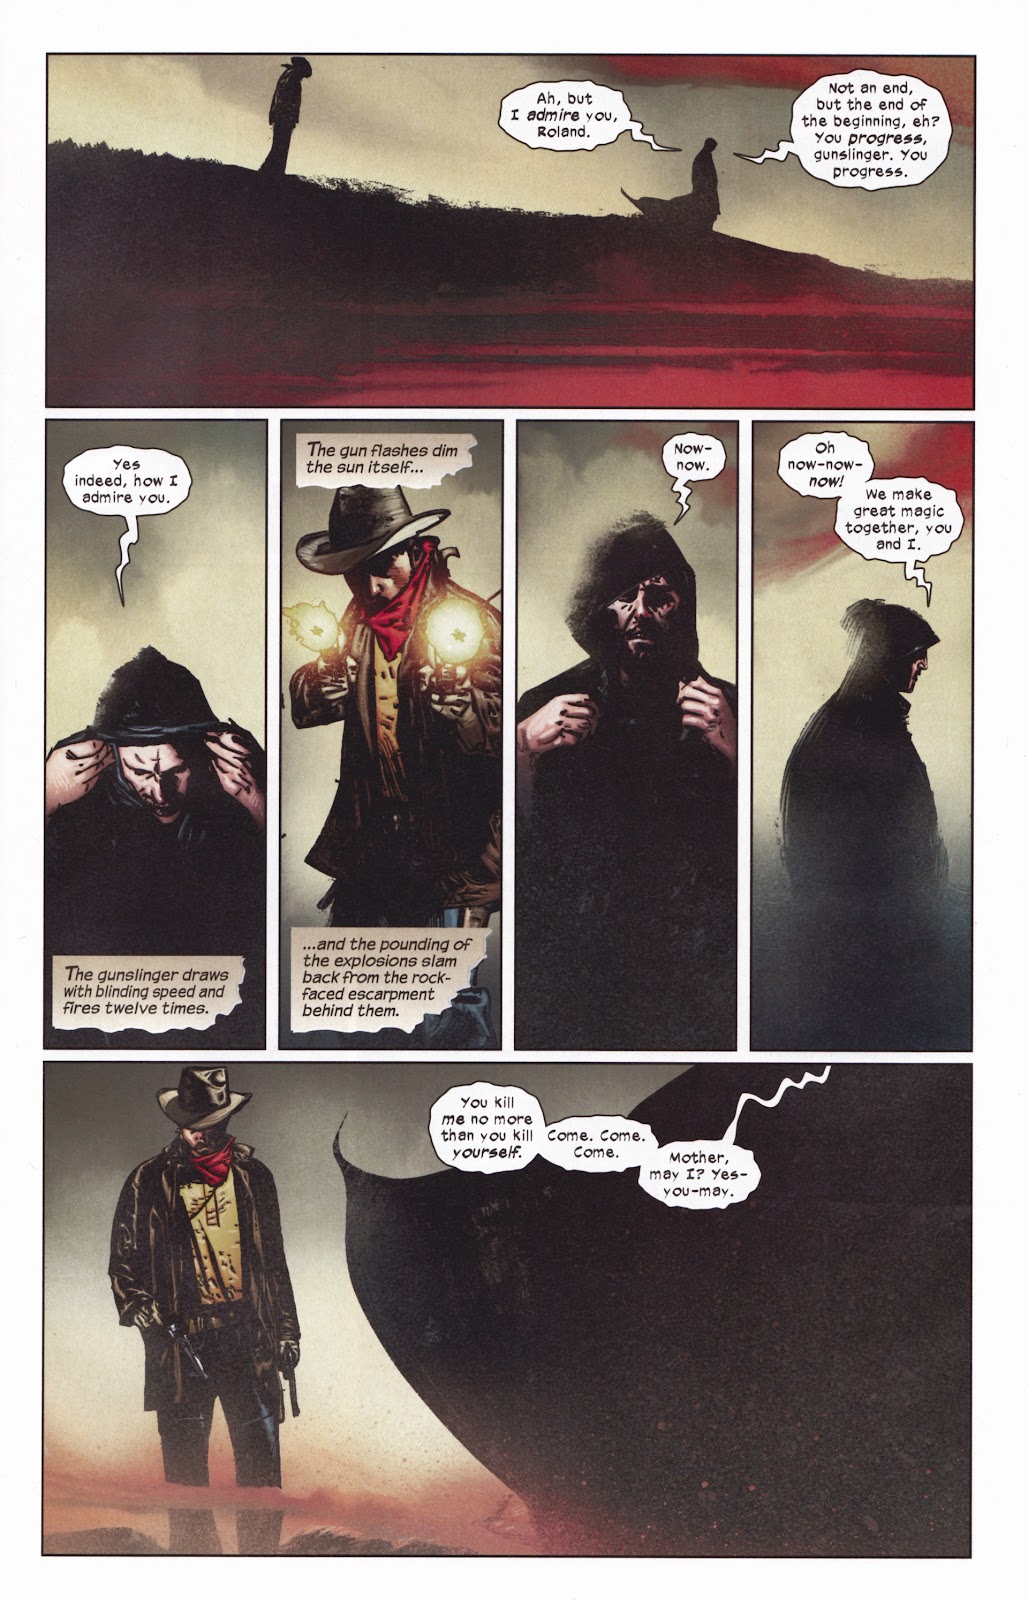 Dark Tower: The Gunslinger - The Man in Black issue 5 - Page 4